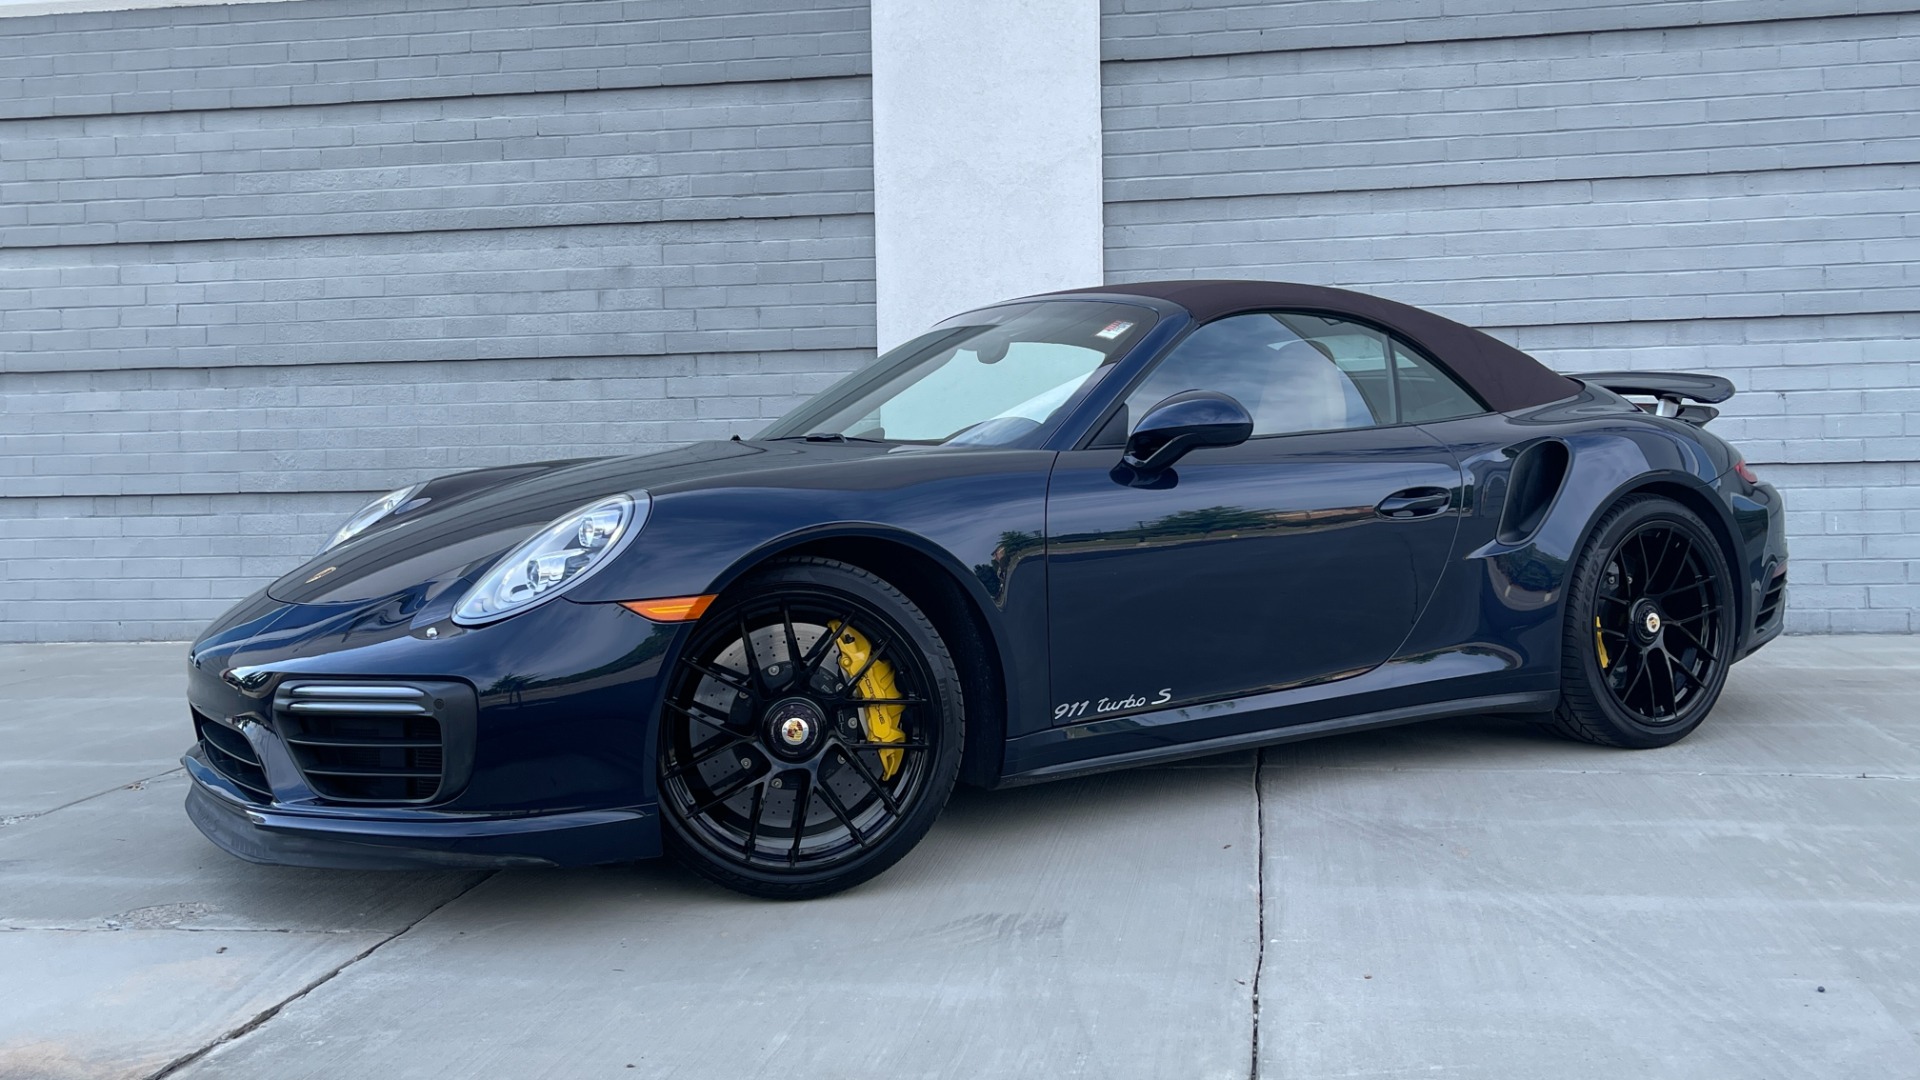 Used 2017 Porsche 911 Turbo S / CABRIOLET / FRONT LIFT / PDK / 20IN WHEELS for sale $179,999 at Formula Imports in Charlotte NC 28227 69